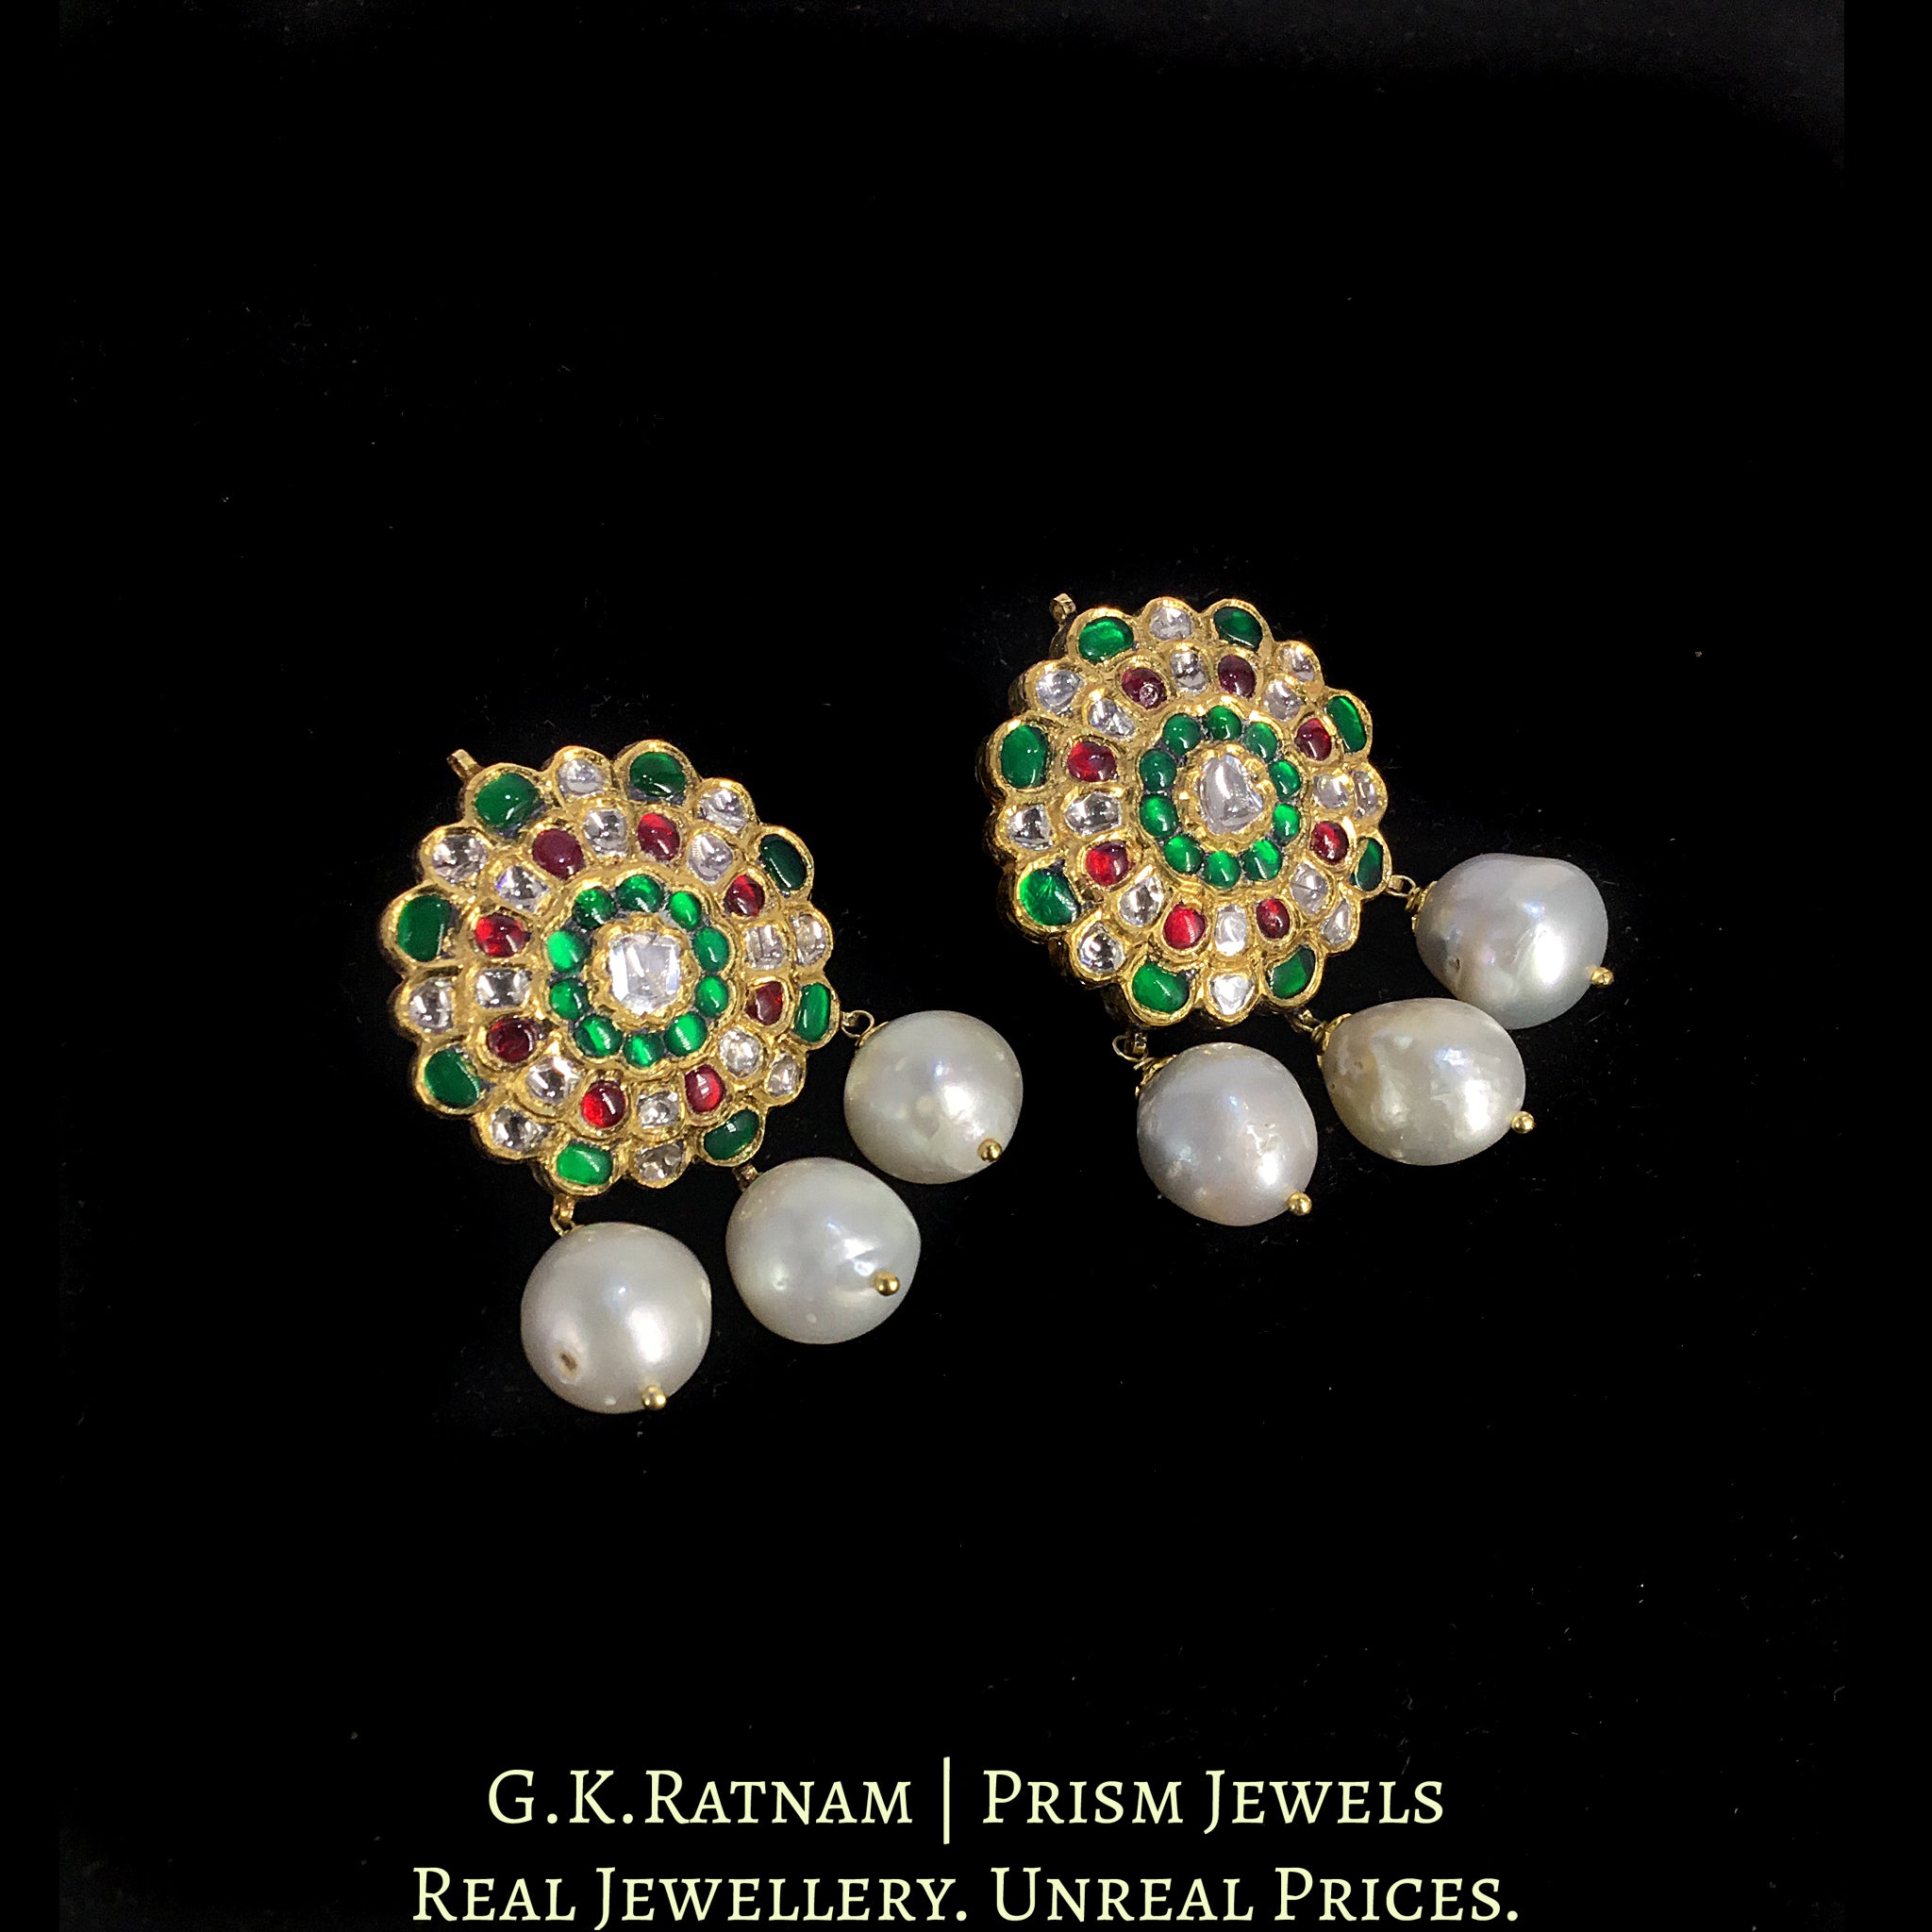 18k Gold and Diamond Polki south-style Karanphool Earring Pair with Rubies and Emeralds